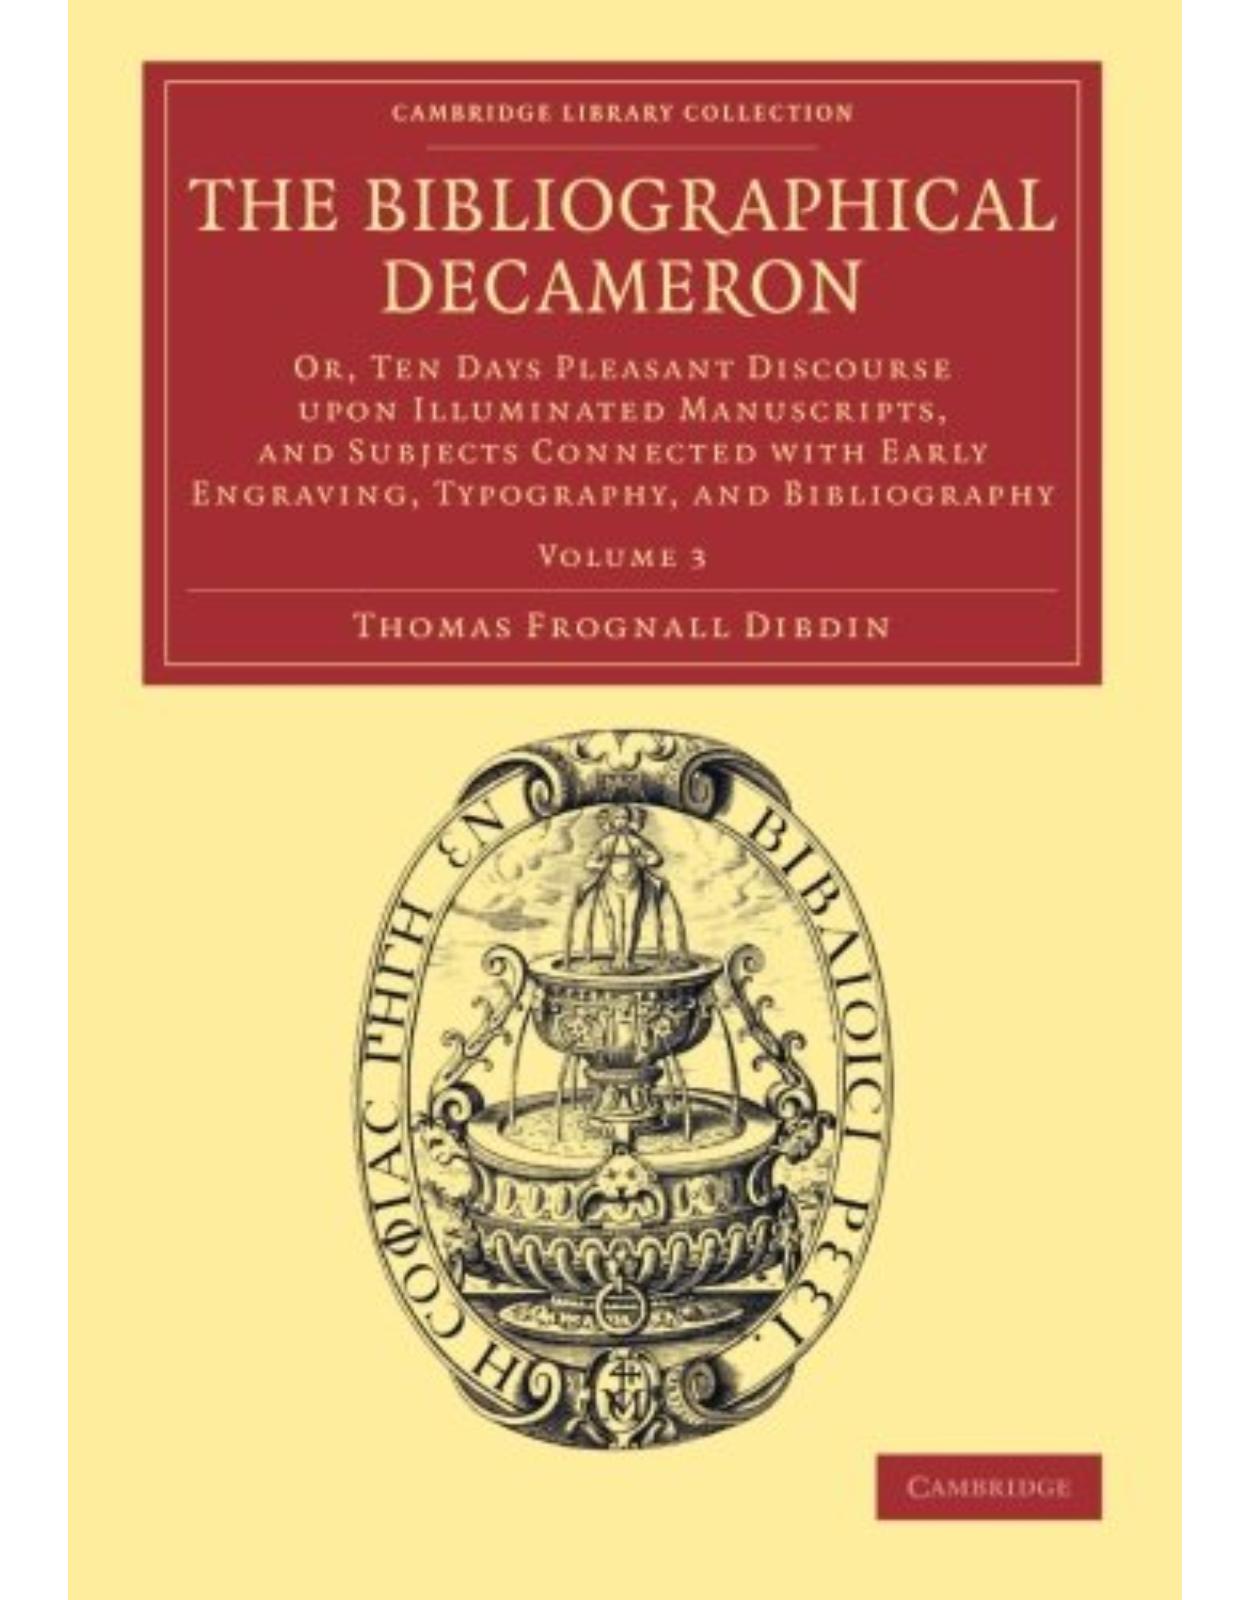 The Bibliographical Decameron 3 Volume Set: The Bibliographical Decameron: Or, Ten Days Pleasant Discourse upon Illuminated Manuscripts, and Subjects ... of Printing, Publishing and Libraries)